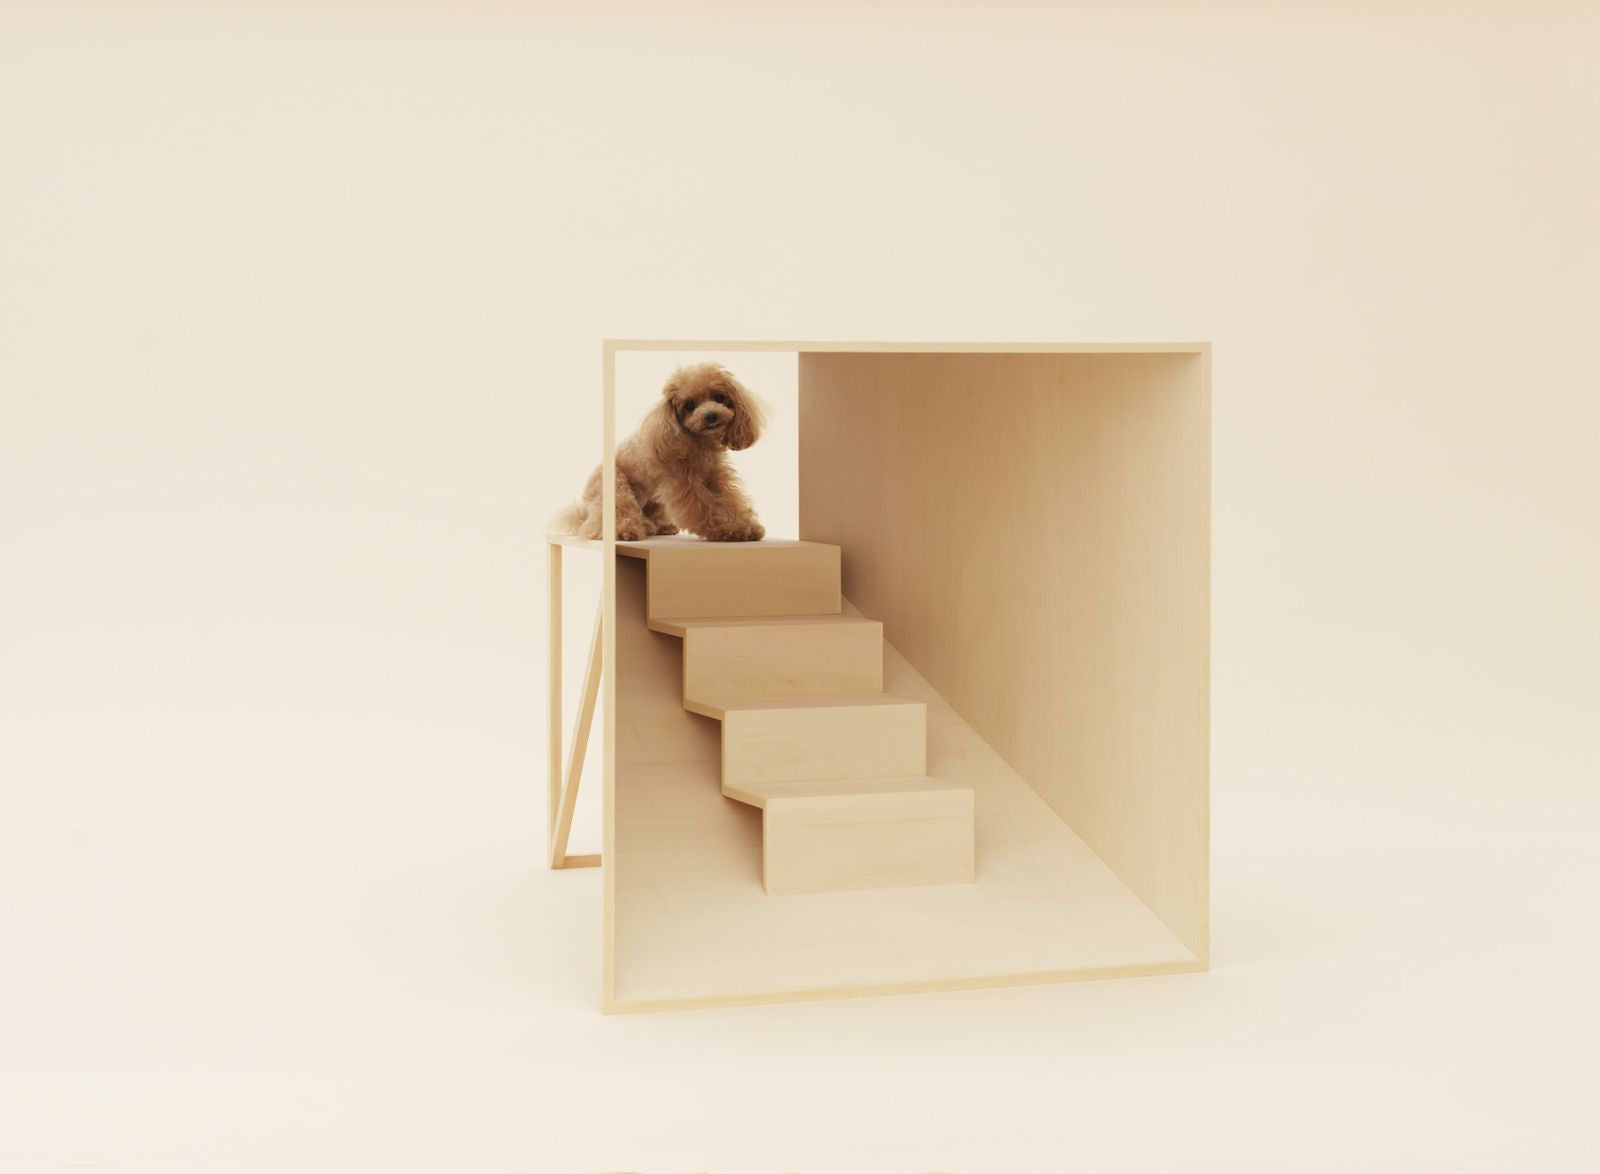 Architecture for Dogs reconsider everyday objects with man’s best friend in mind